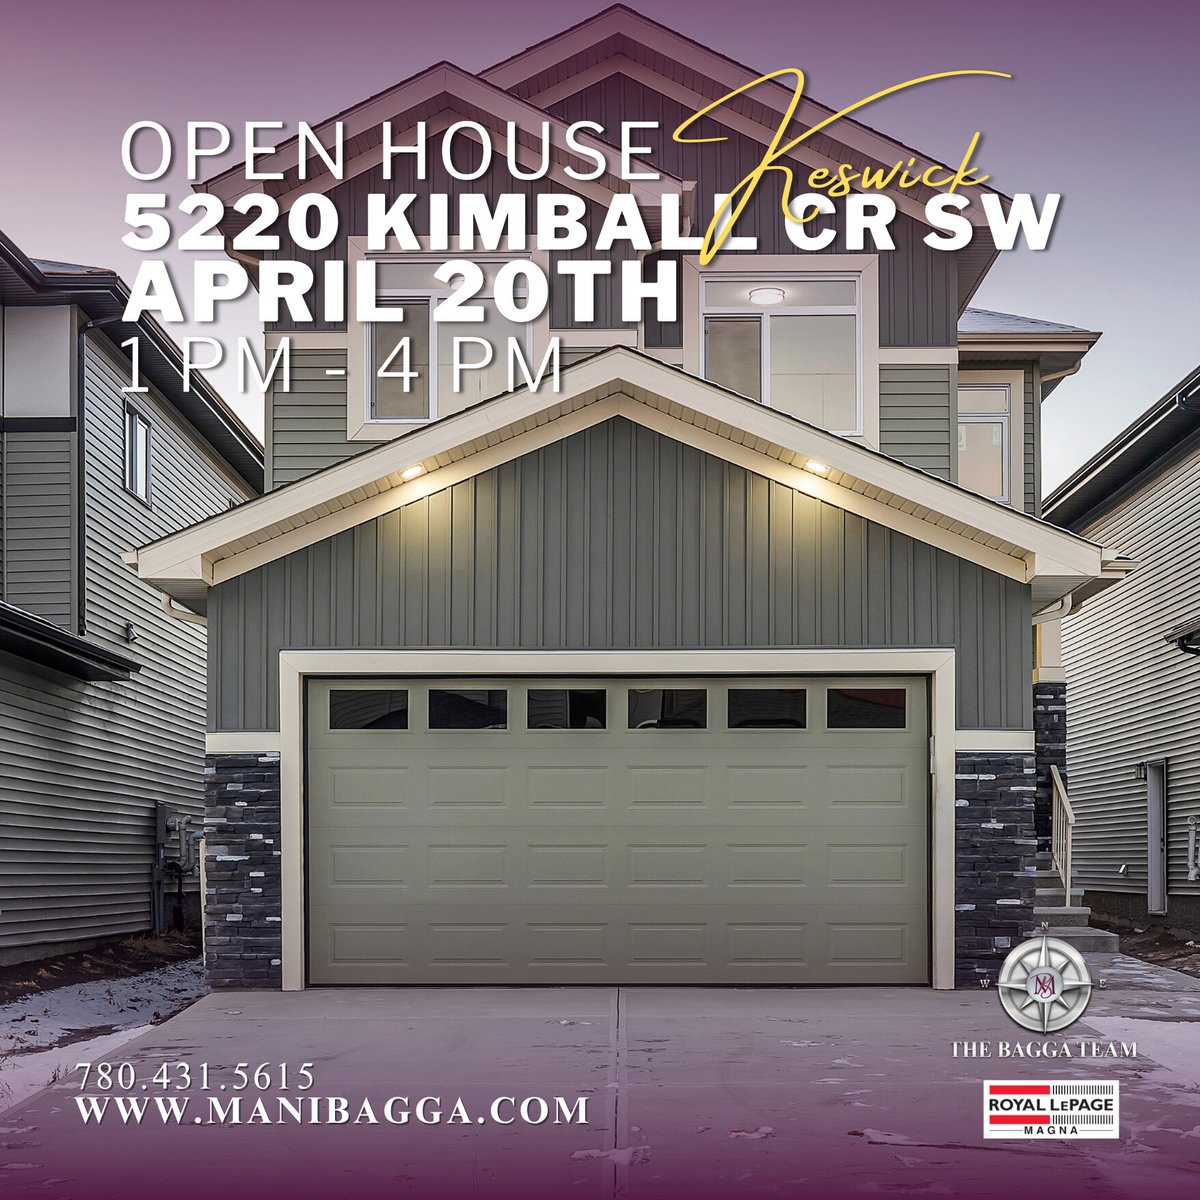 ✅ MARK YOUR CALENDAR. This weekend, April 20th, we have 3 fantastic properties for you to check out. SWIPE LEFT FOR ALL EVENTS! 780.431.5615 | ManiBagga.com #Windermere #ManiMagna #ManiBagga #BaggaBeginnings #YEGBeginnings #OpenHouseYEG #Keswick #OpenHouse